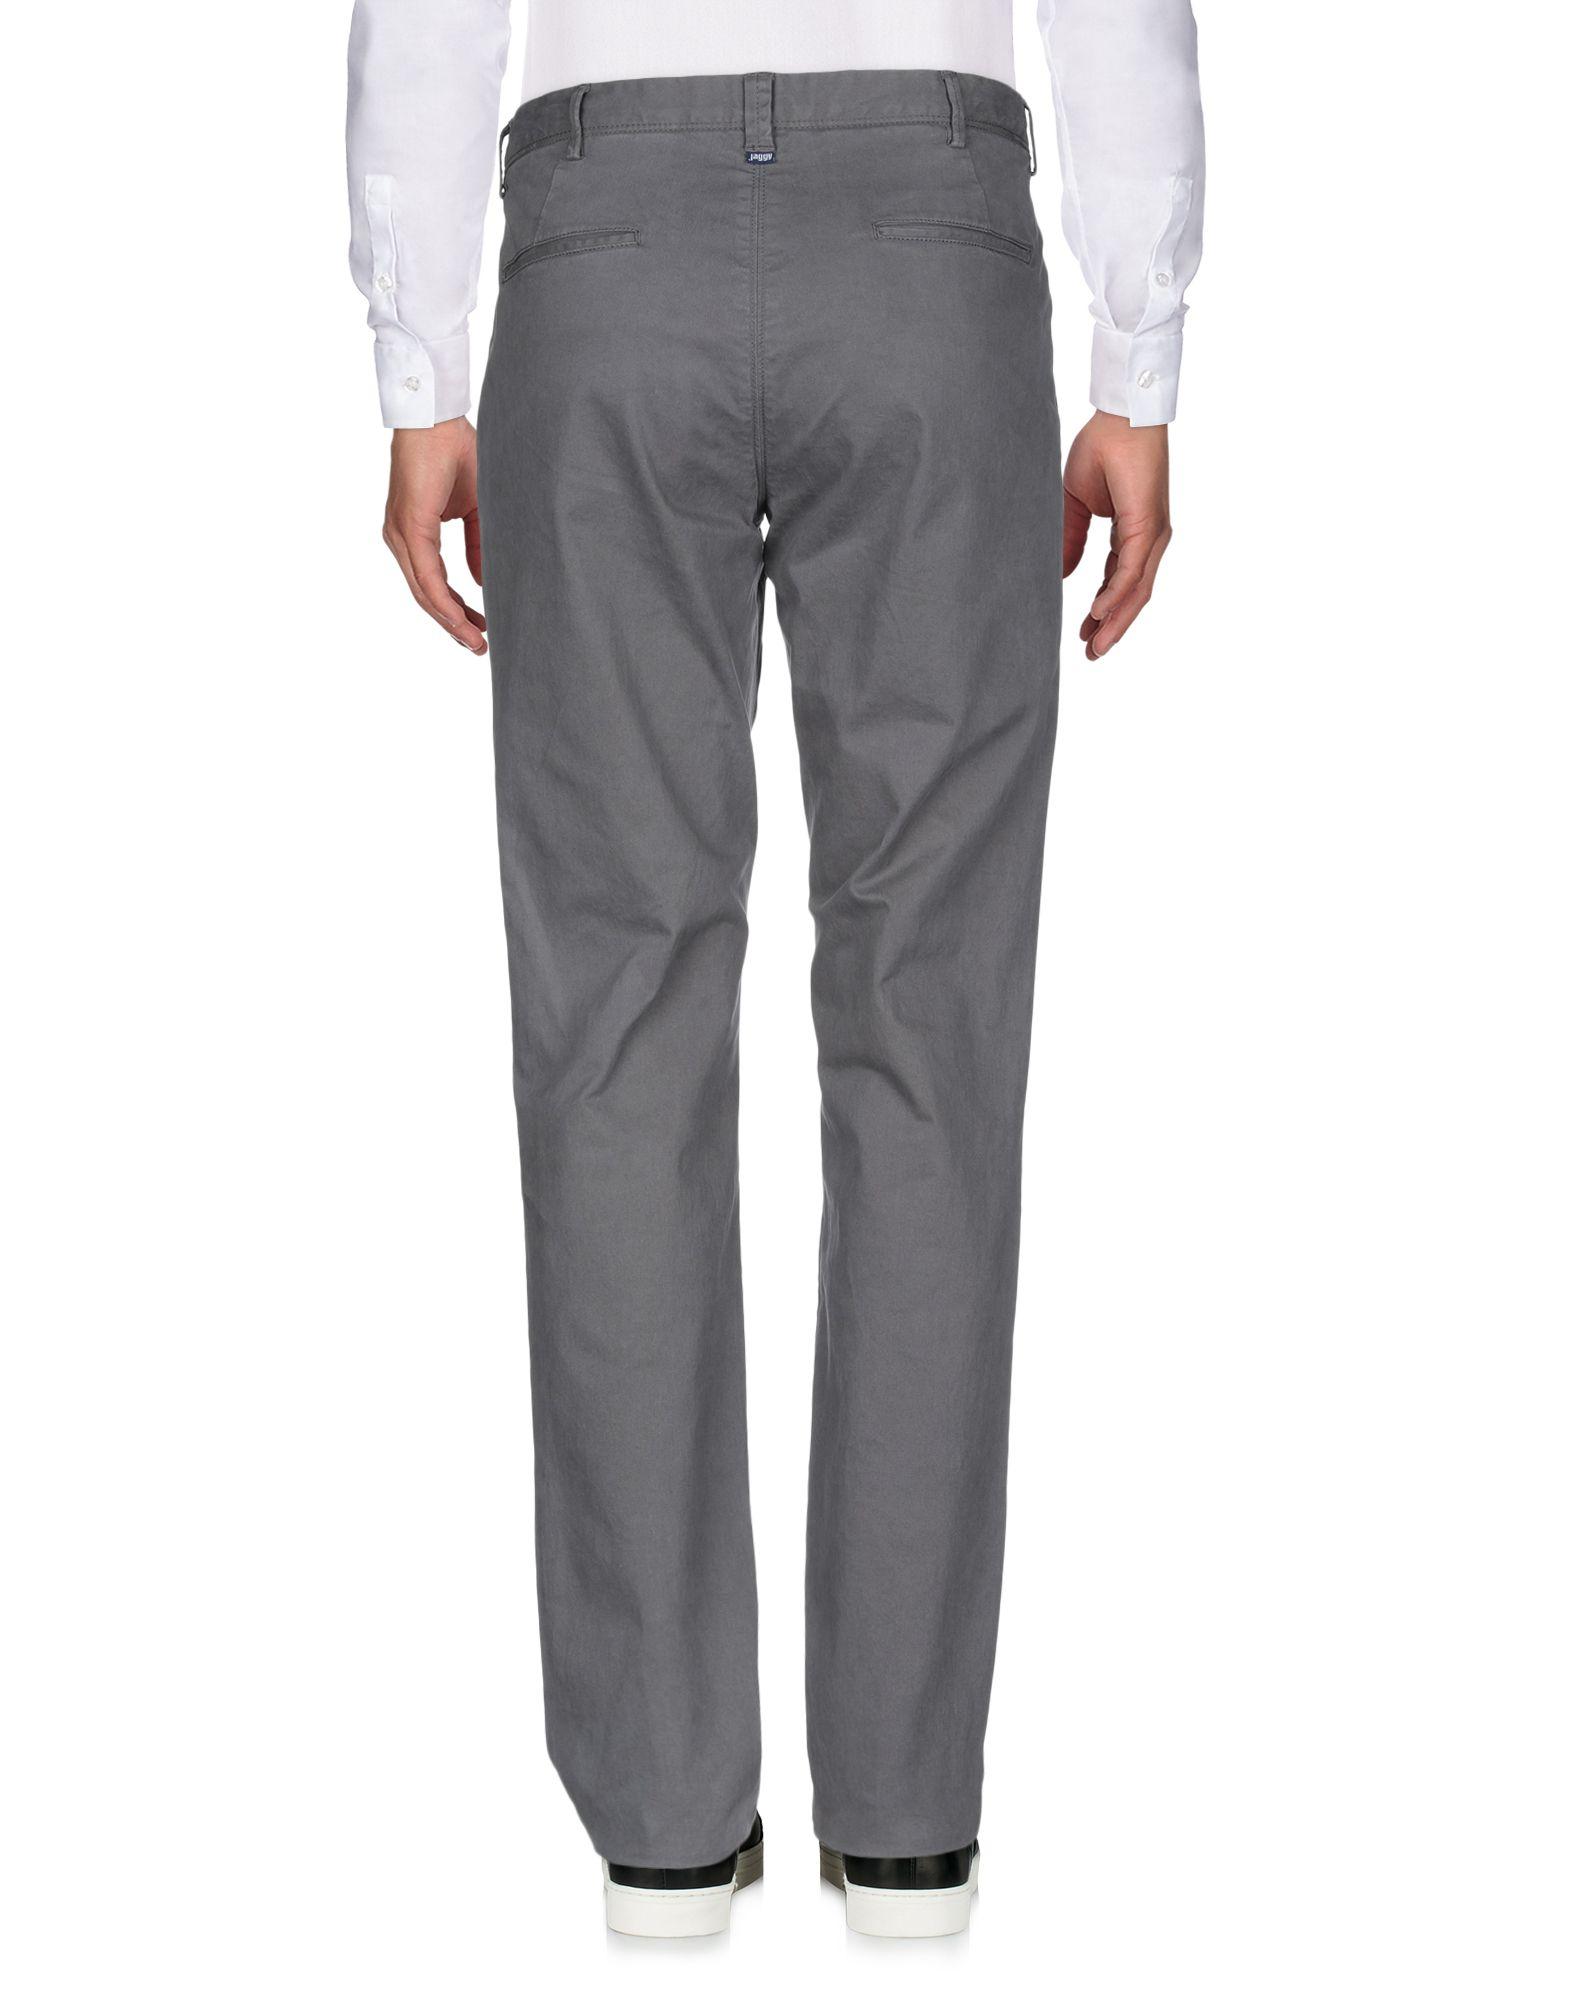 Jaggy Cotton Casual Trouser in Lead (Gray) for Men - Lyst